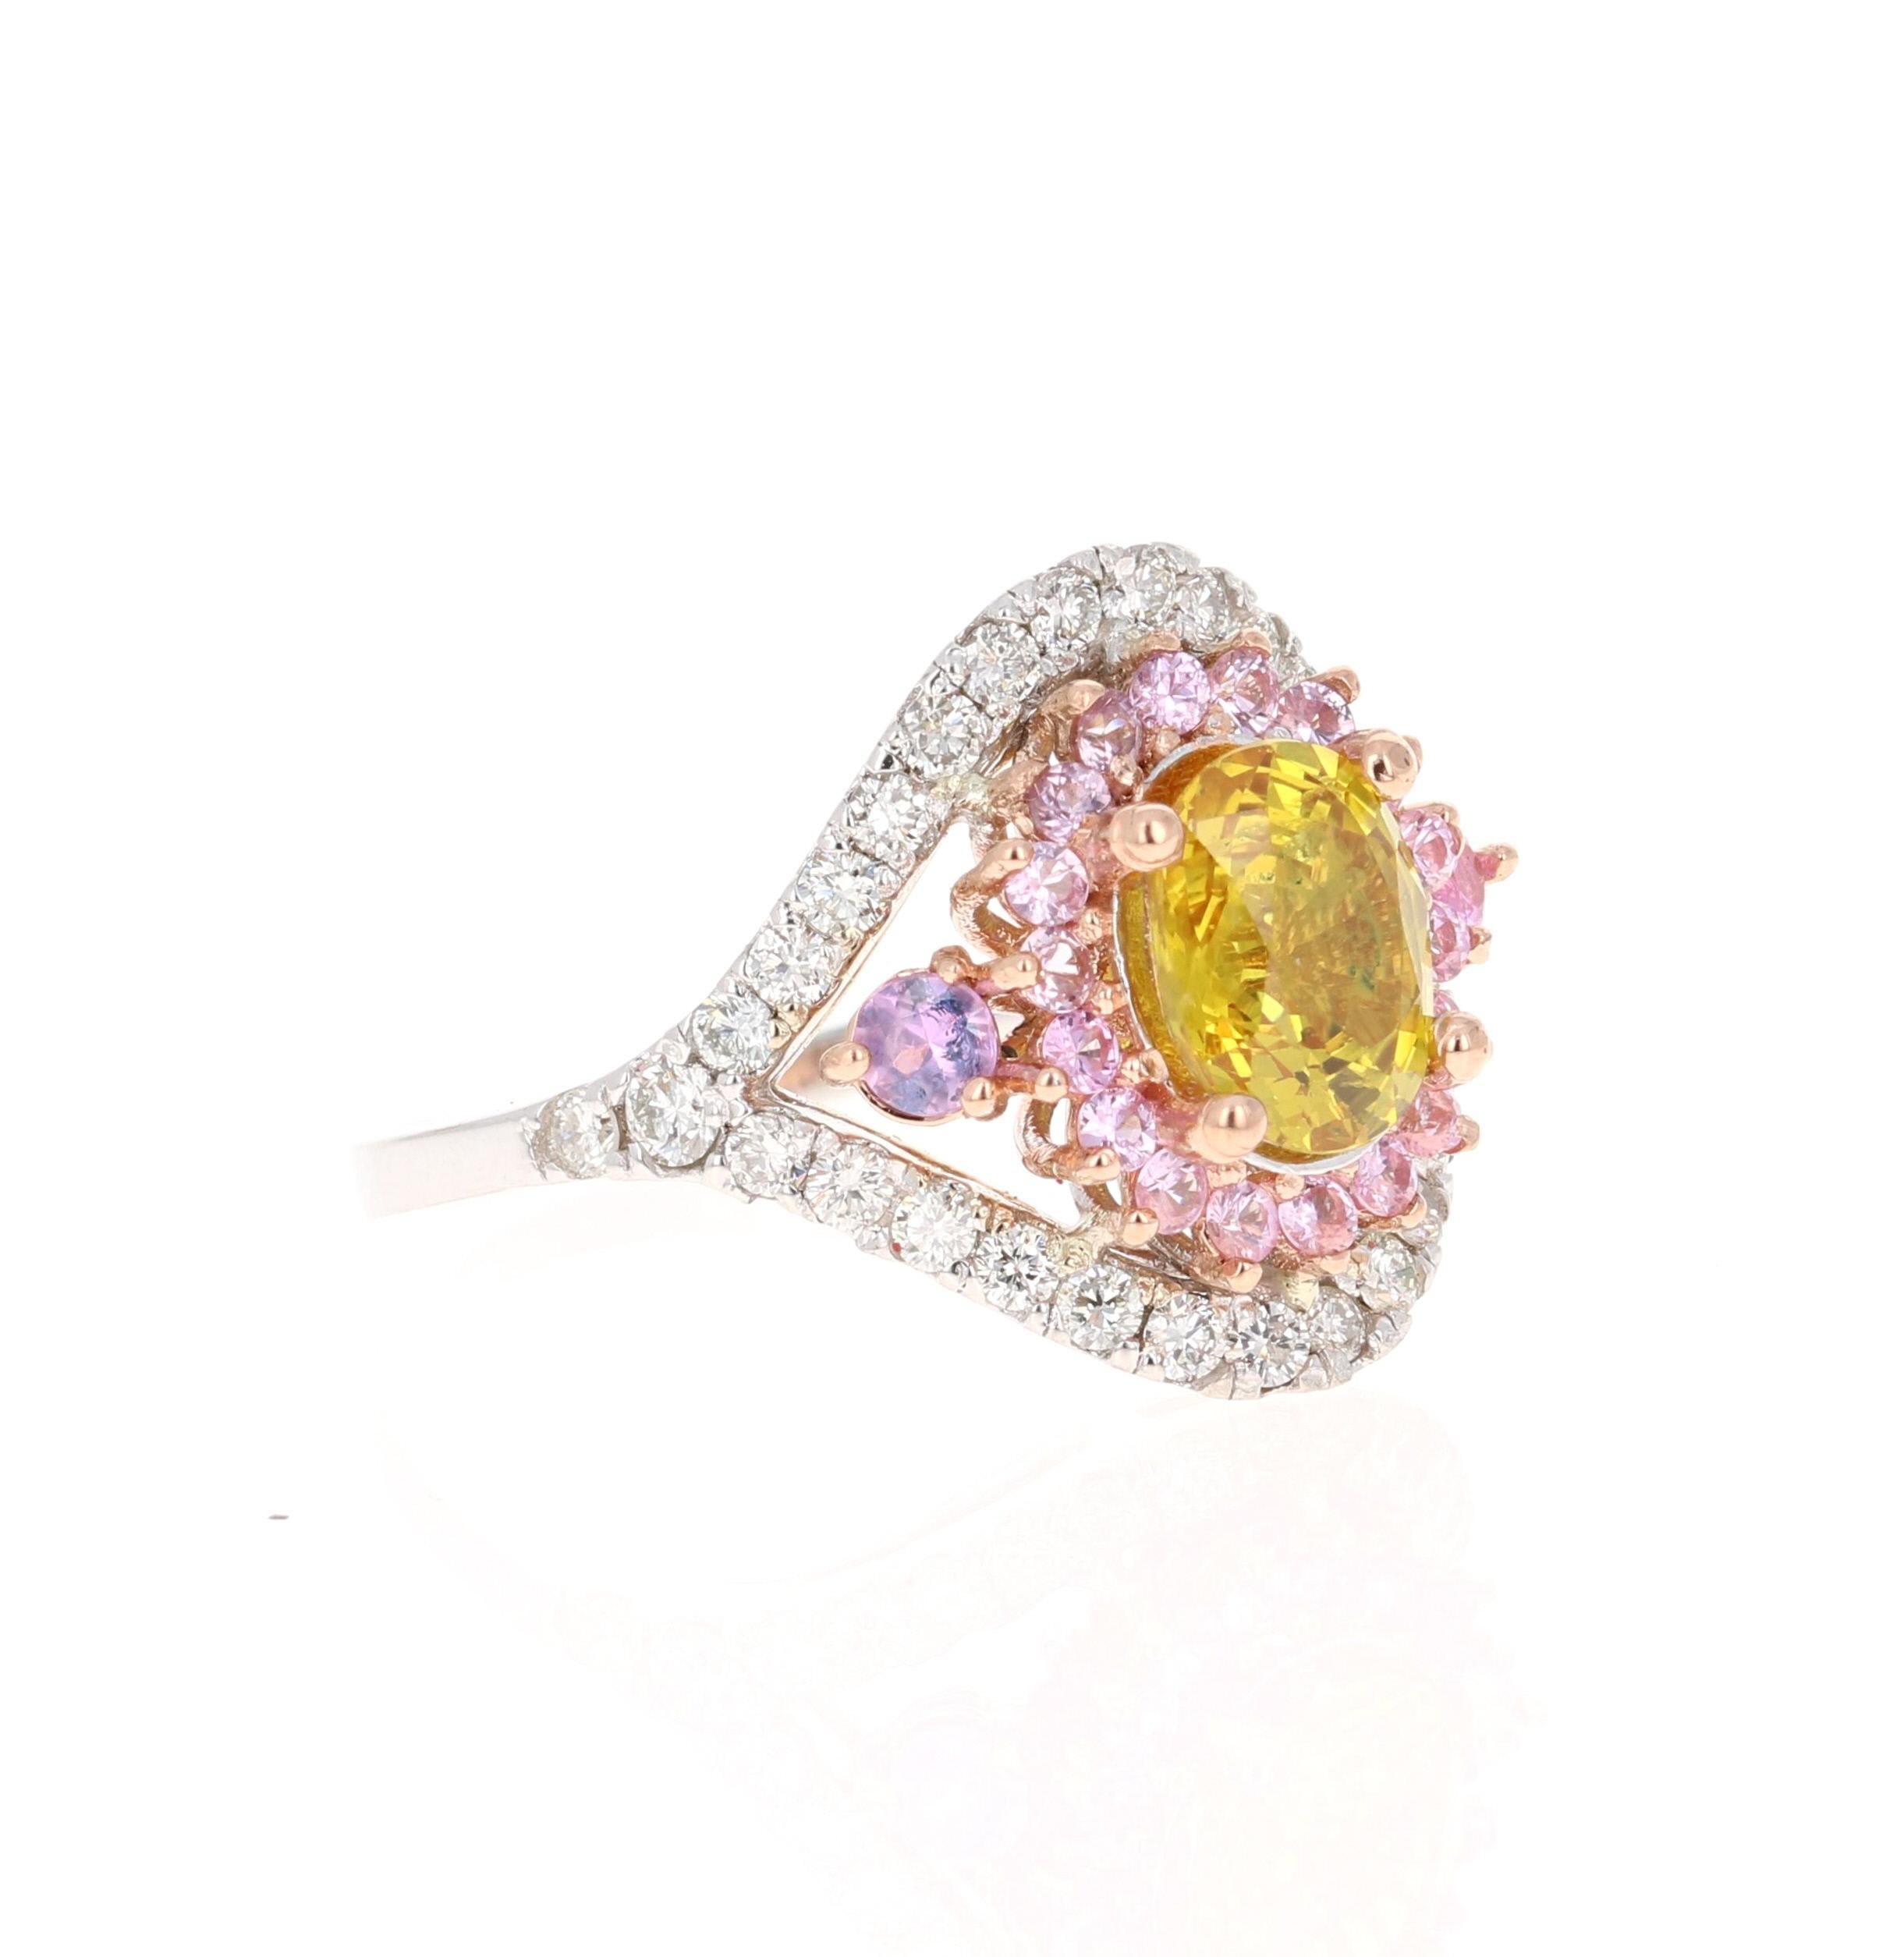 This beautiful ring has an Oval Cut Yellow Sapphire that weighs 1.66 Carats. It is surrounded by 21 Round Cut Pink Sapphires that weigh 0.57 Carats and 36 Round Cut Diamonds that weigh 0.70 Carats. (Clarity: VS, Color: H) The total carat weight of